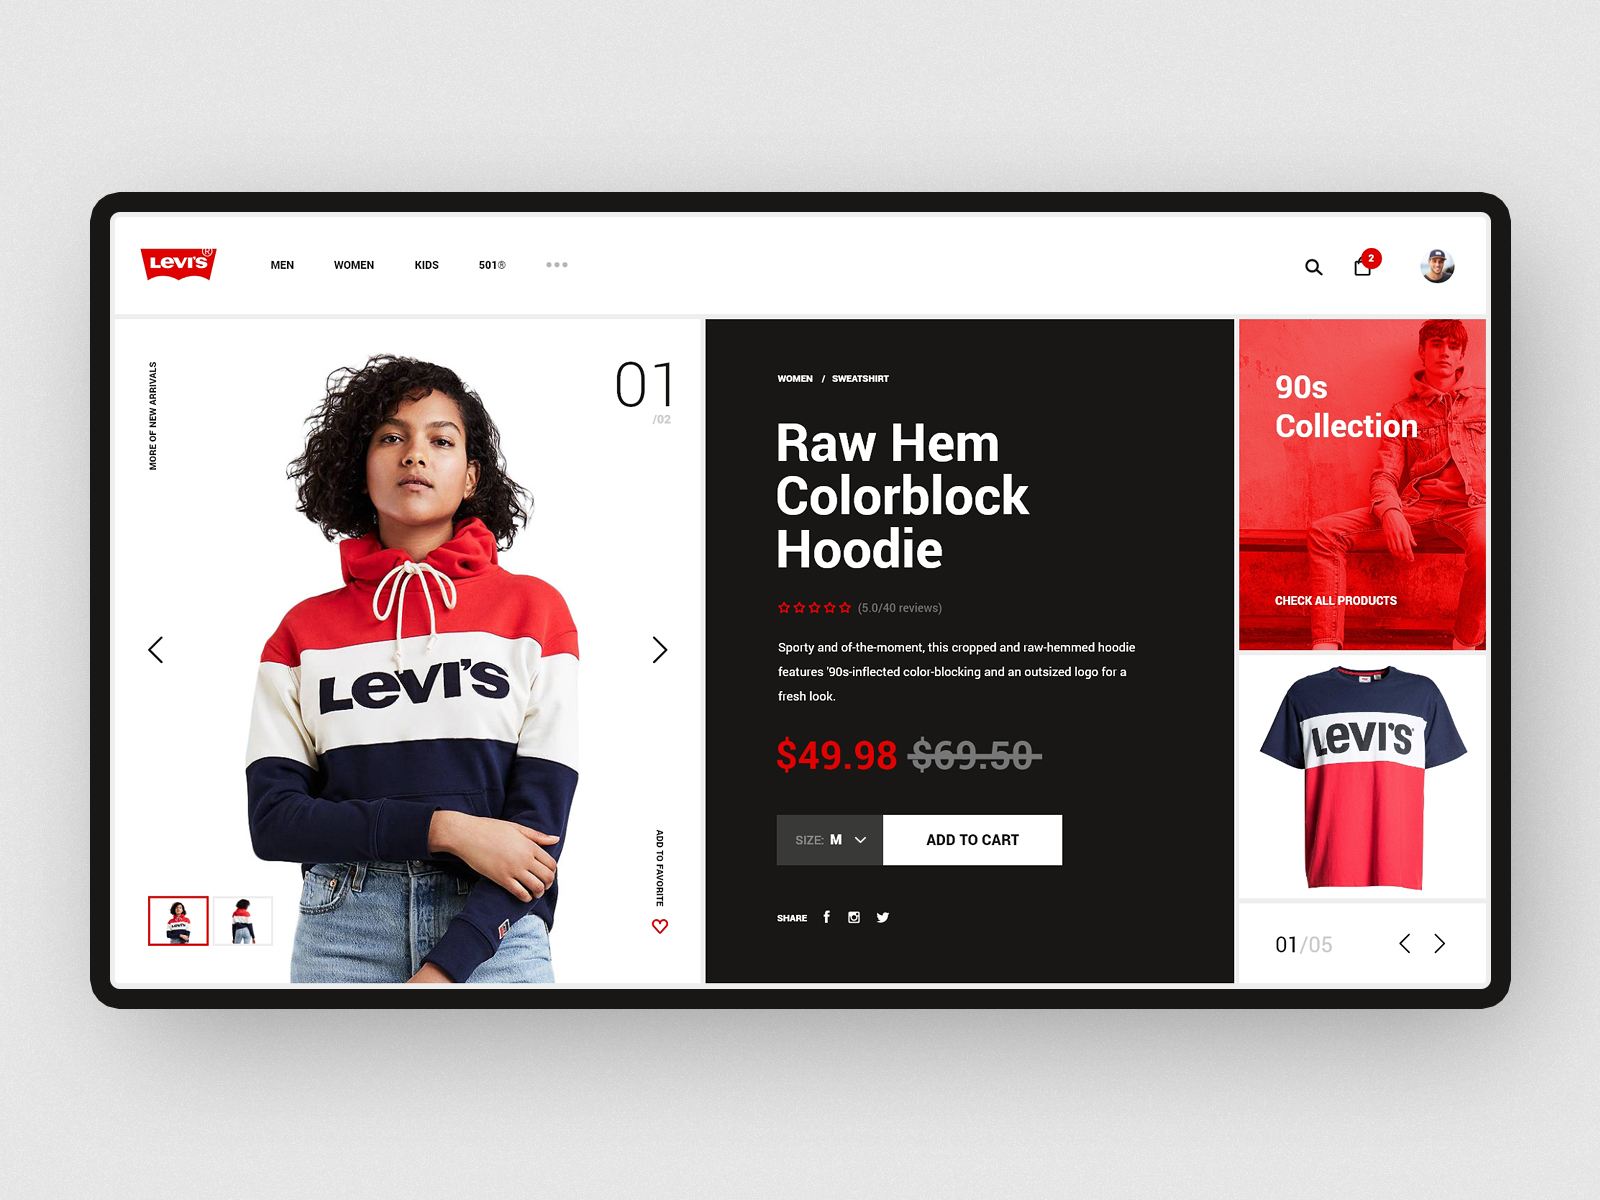 Levis designs, themes, templates and 